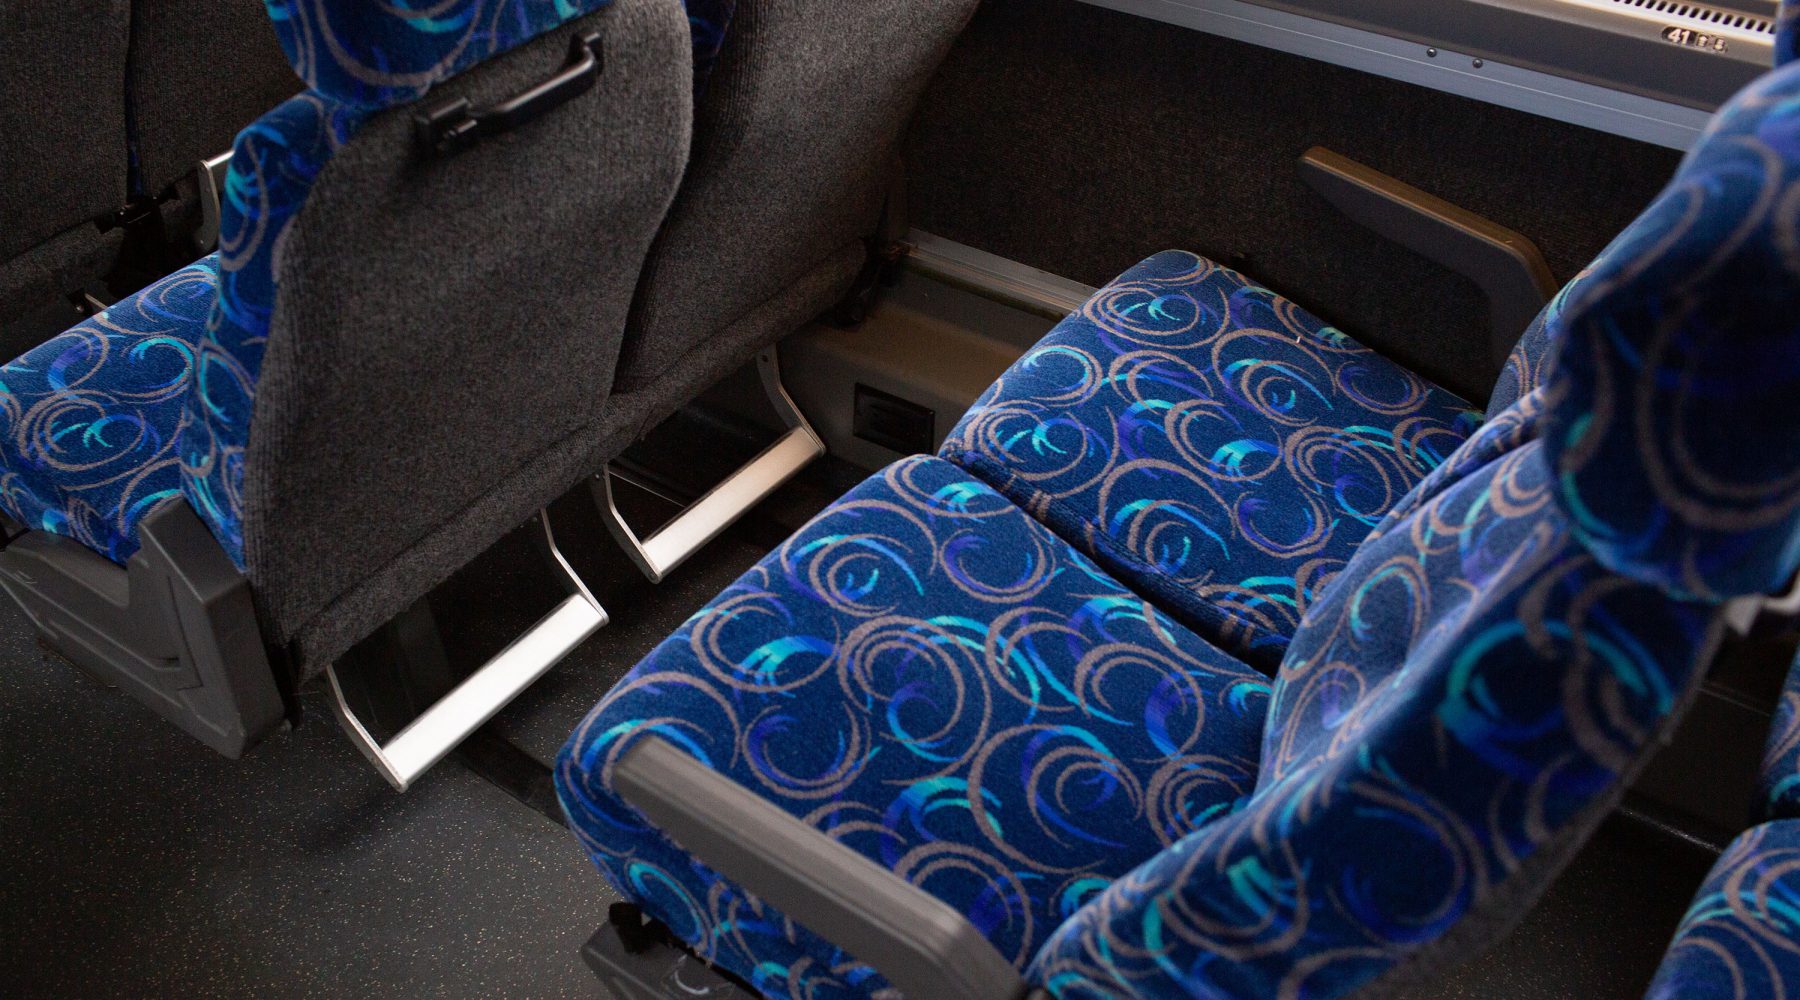 Bus seats with armrests and footrests